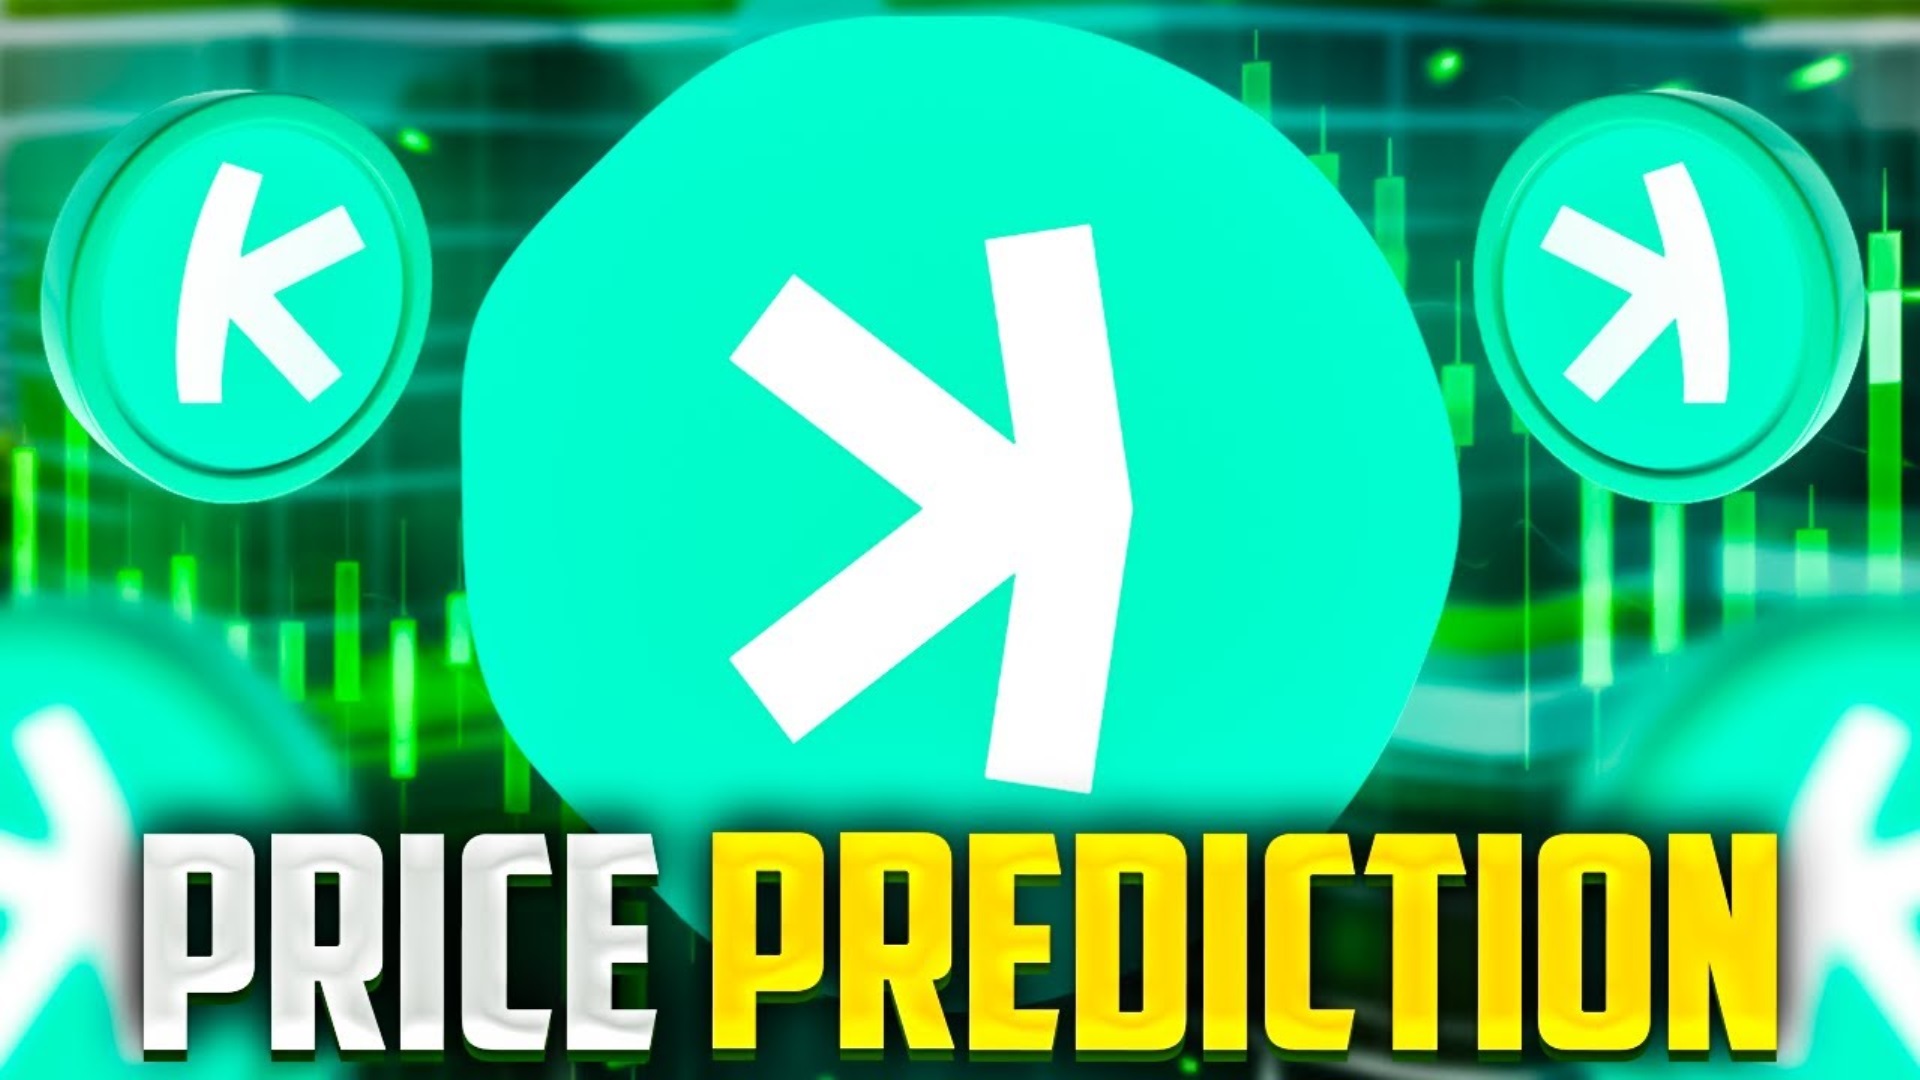 Kaspa Price Prediction 2023 Is it Possible for $KAS to Set a New All-Time High Before 2024?